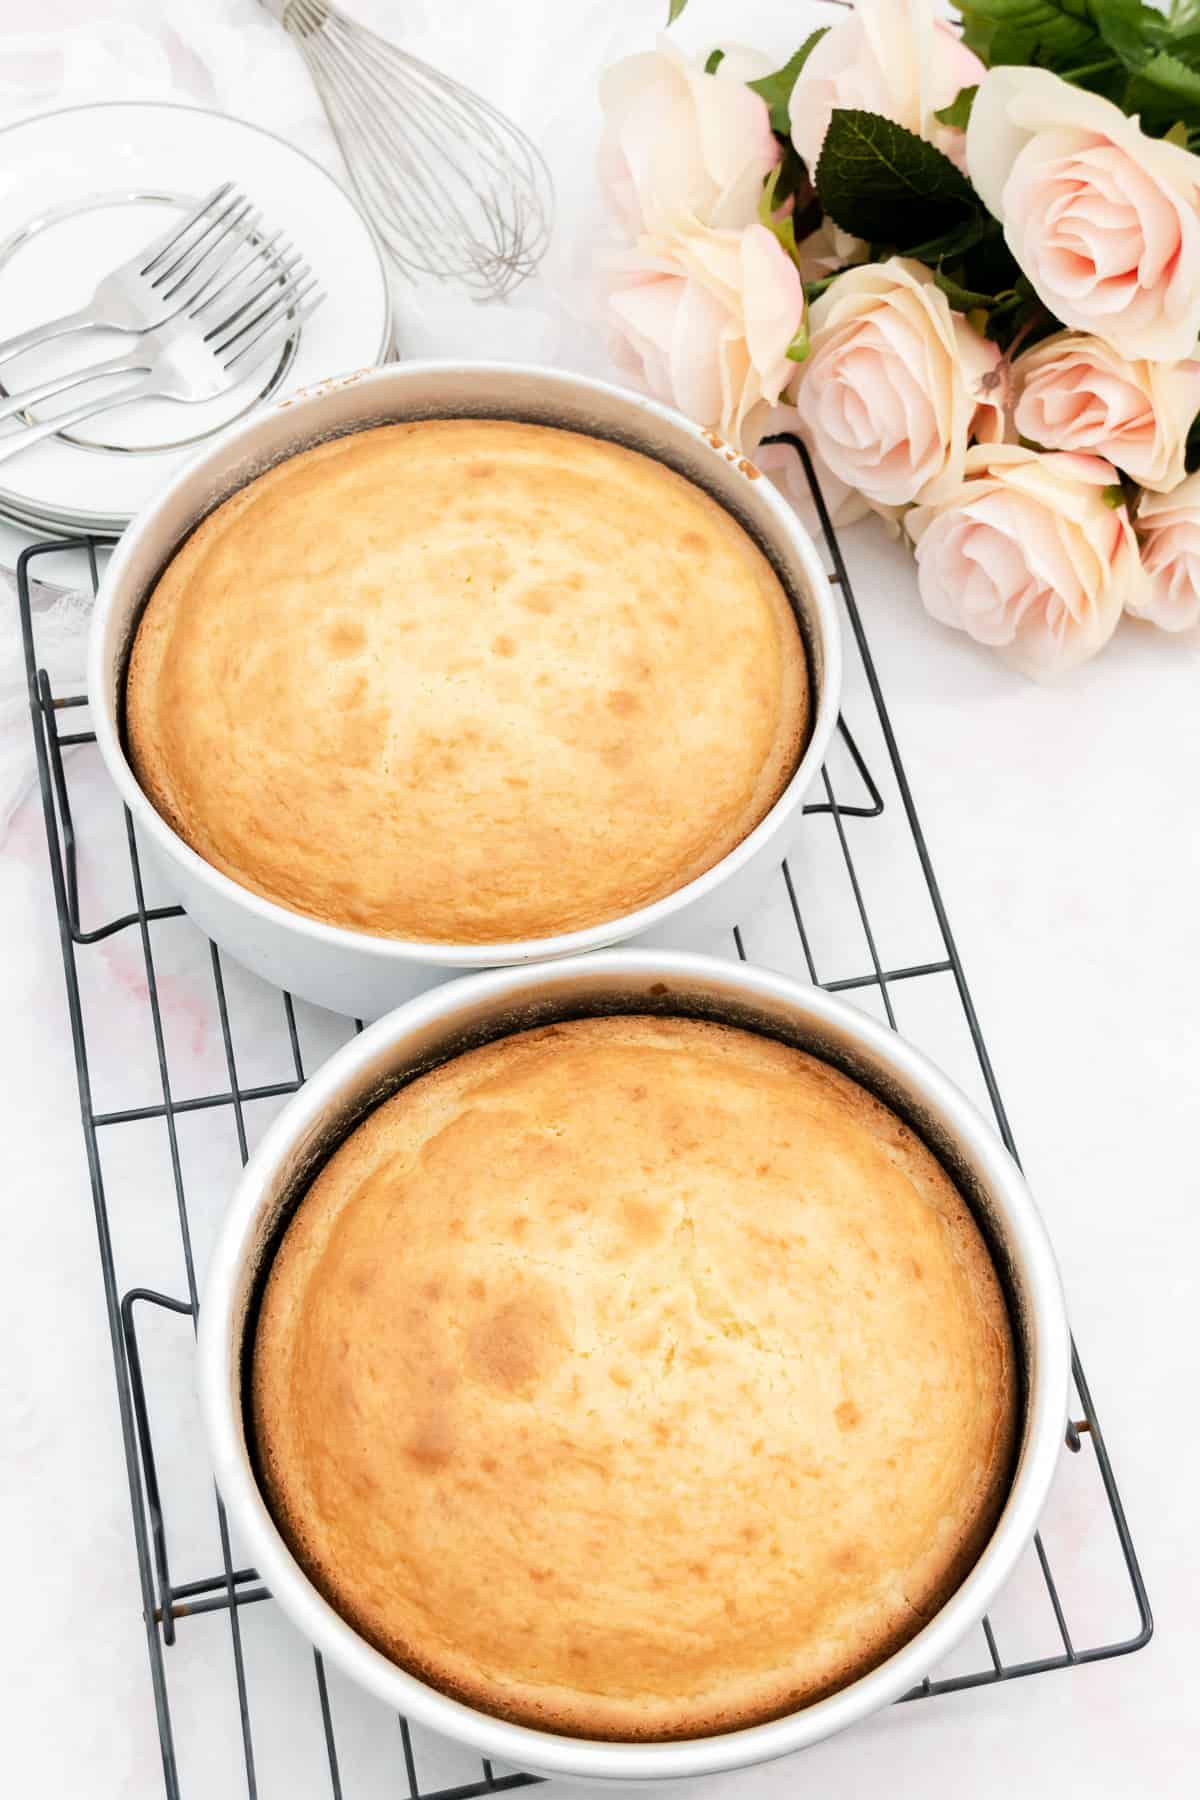 Two baked vanilla cake layers in pans on a cooling rack.